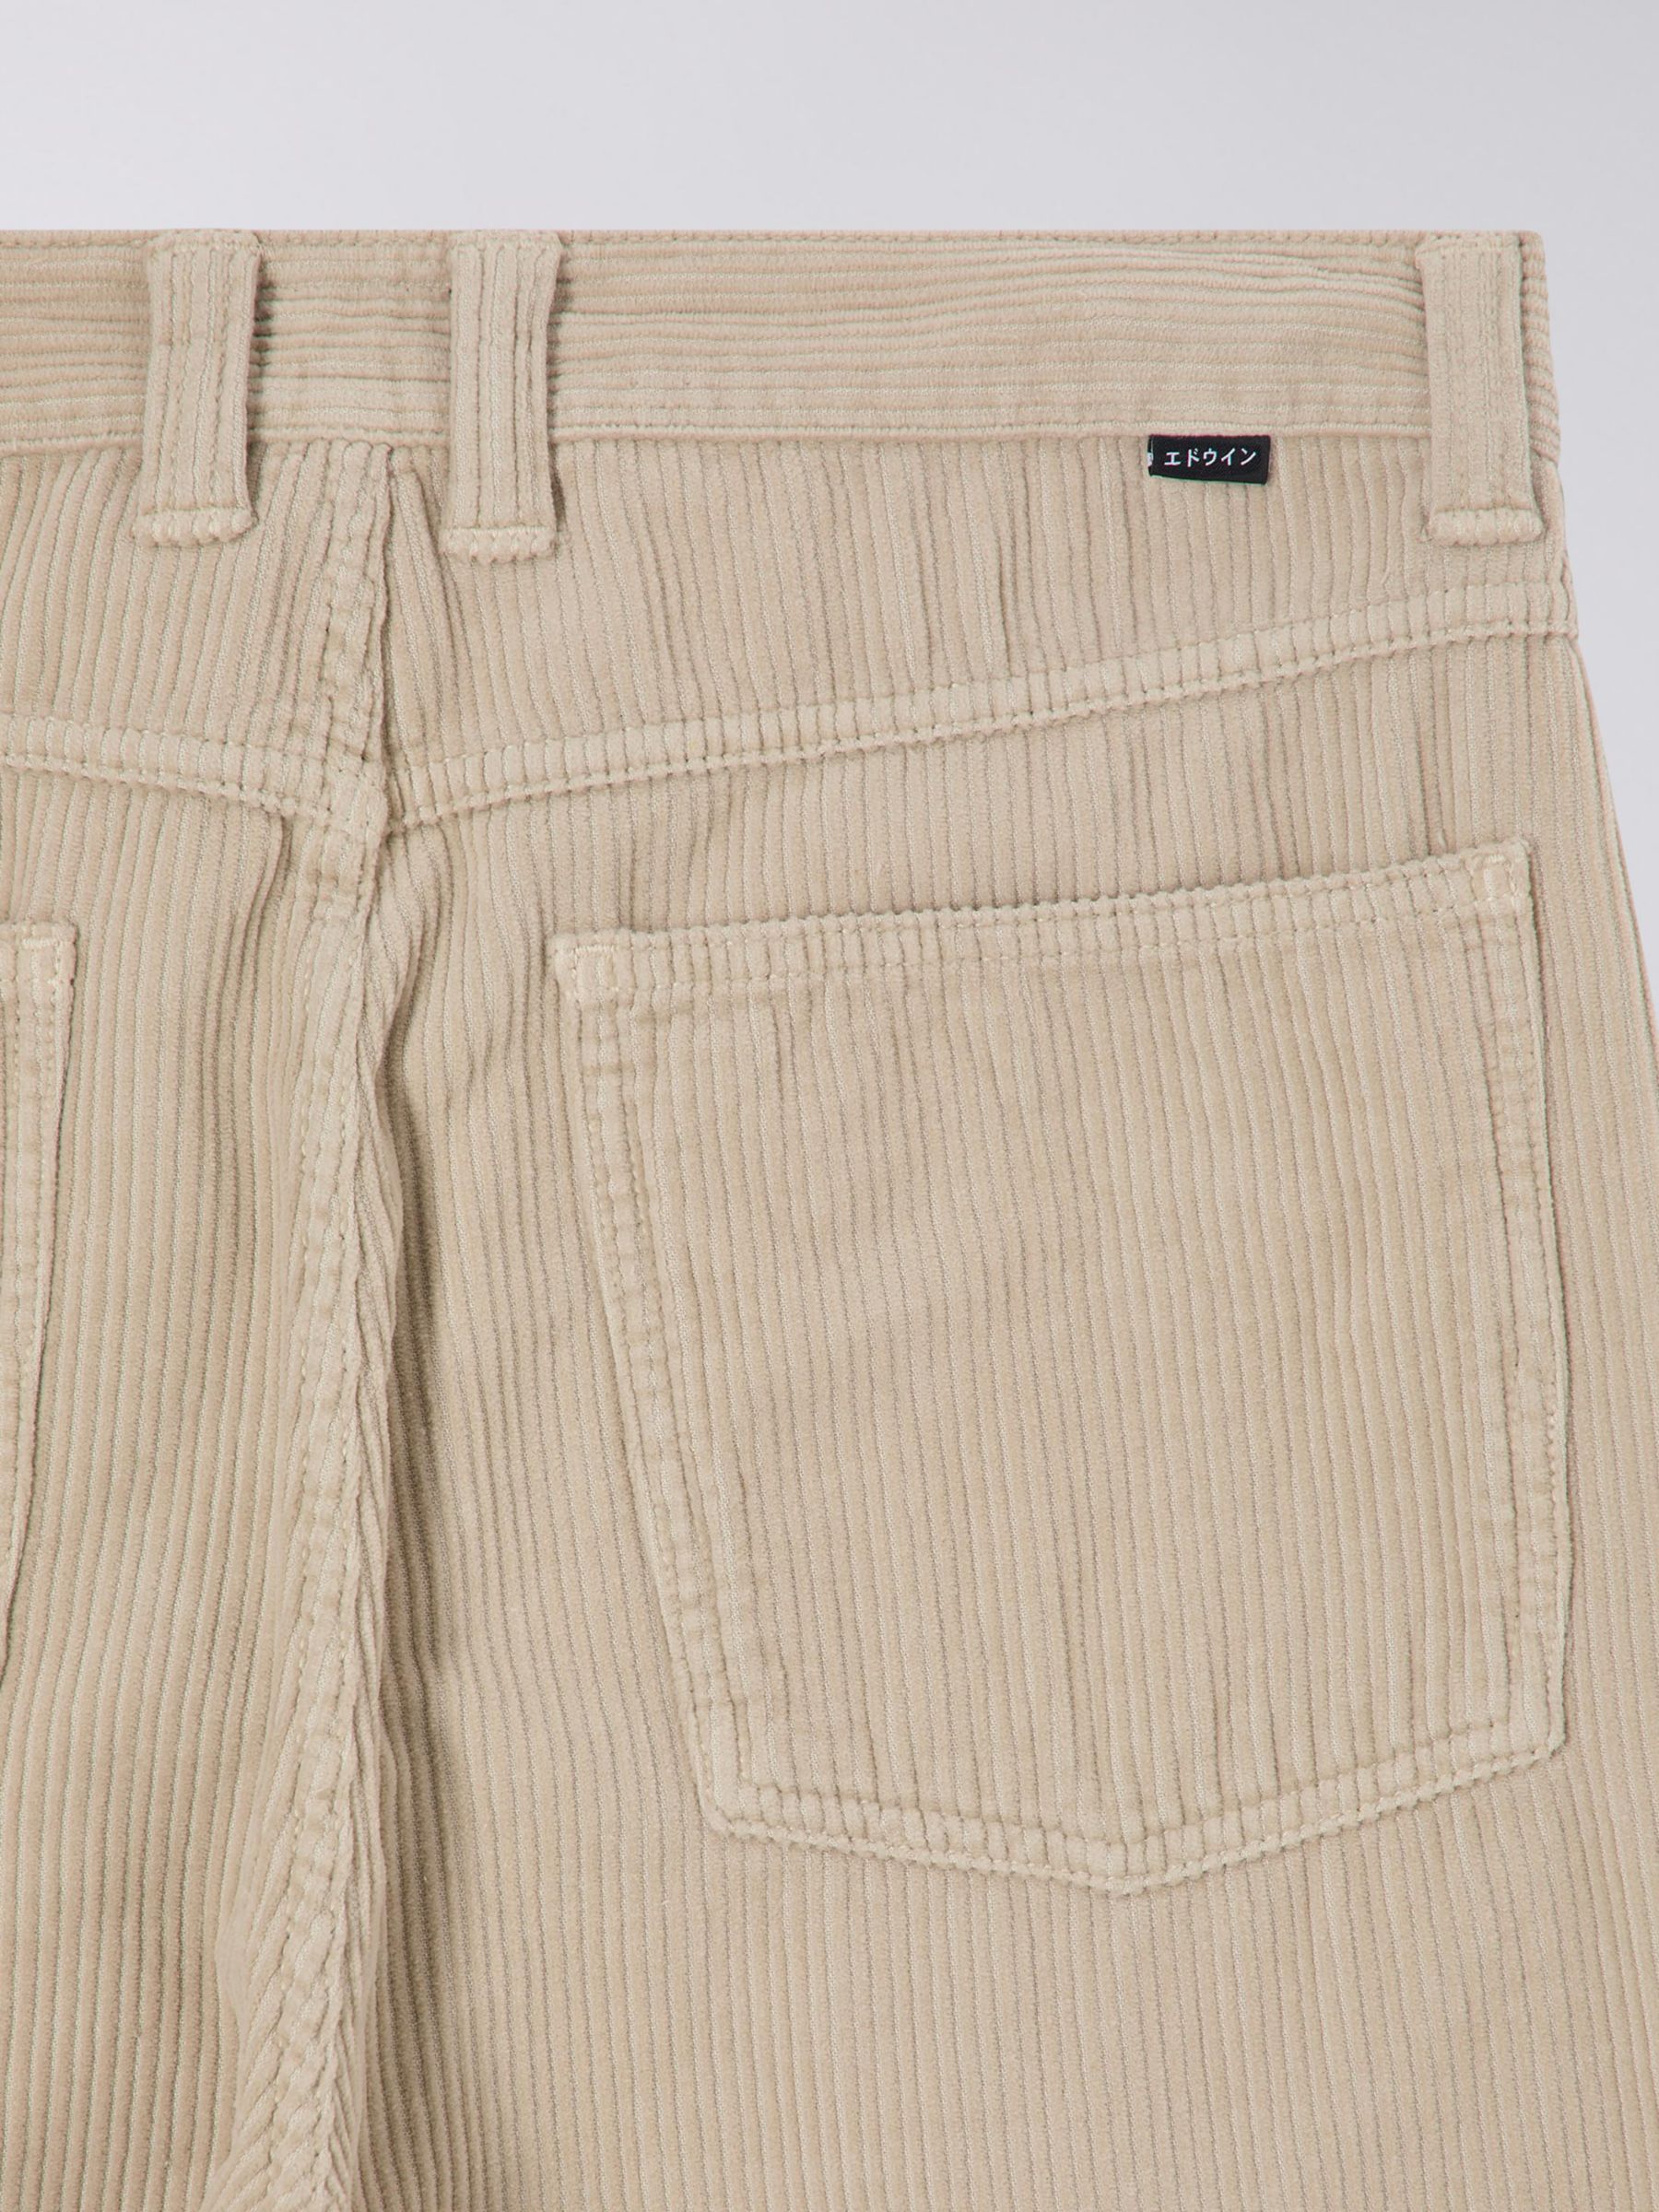 Edwin Sly Relaxed Fit Corduroy Trousers, Peyote, 36R